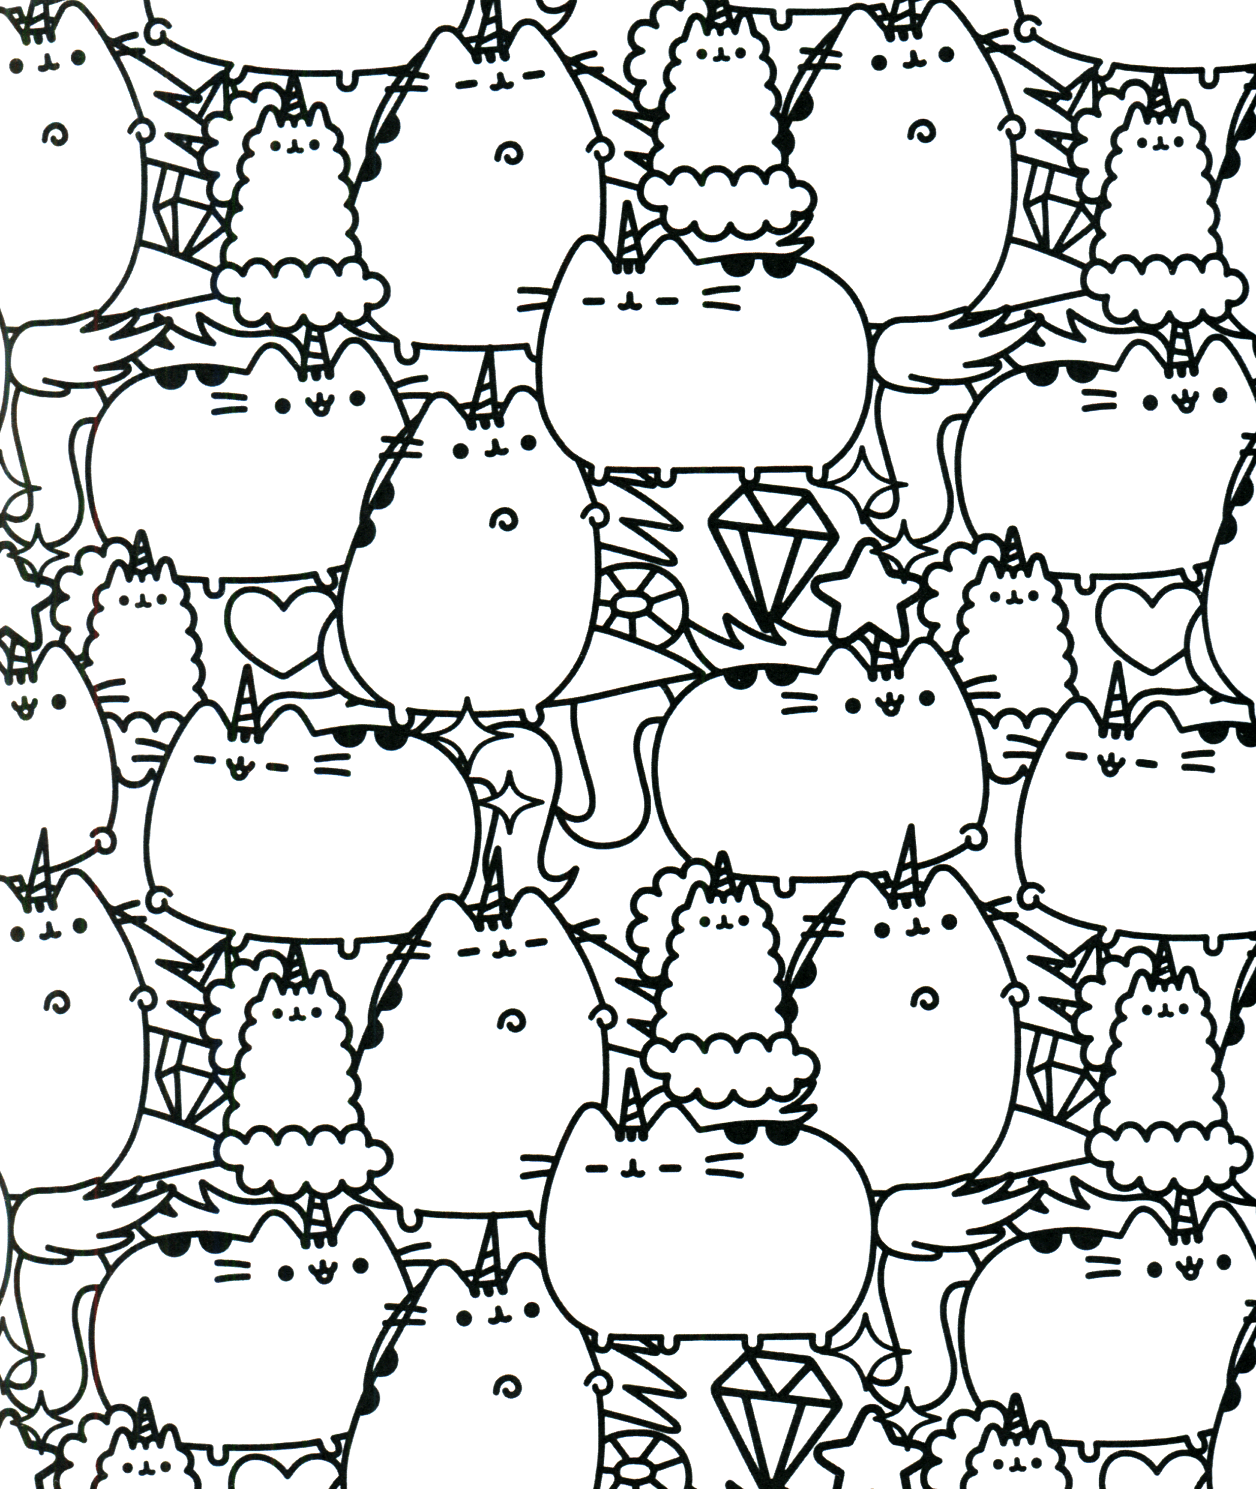 Pusheen Cat Coloring Page